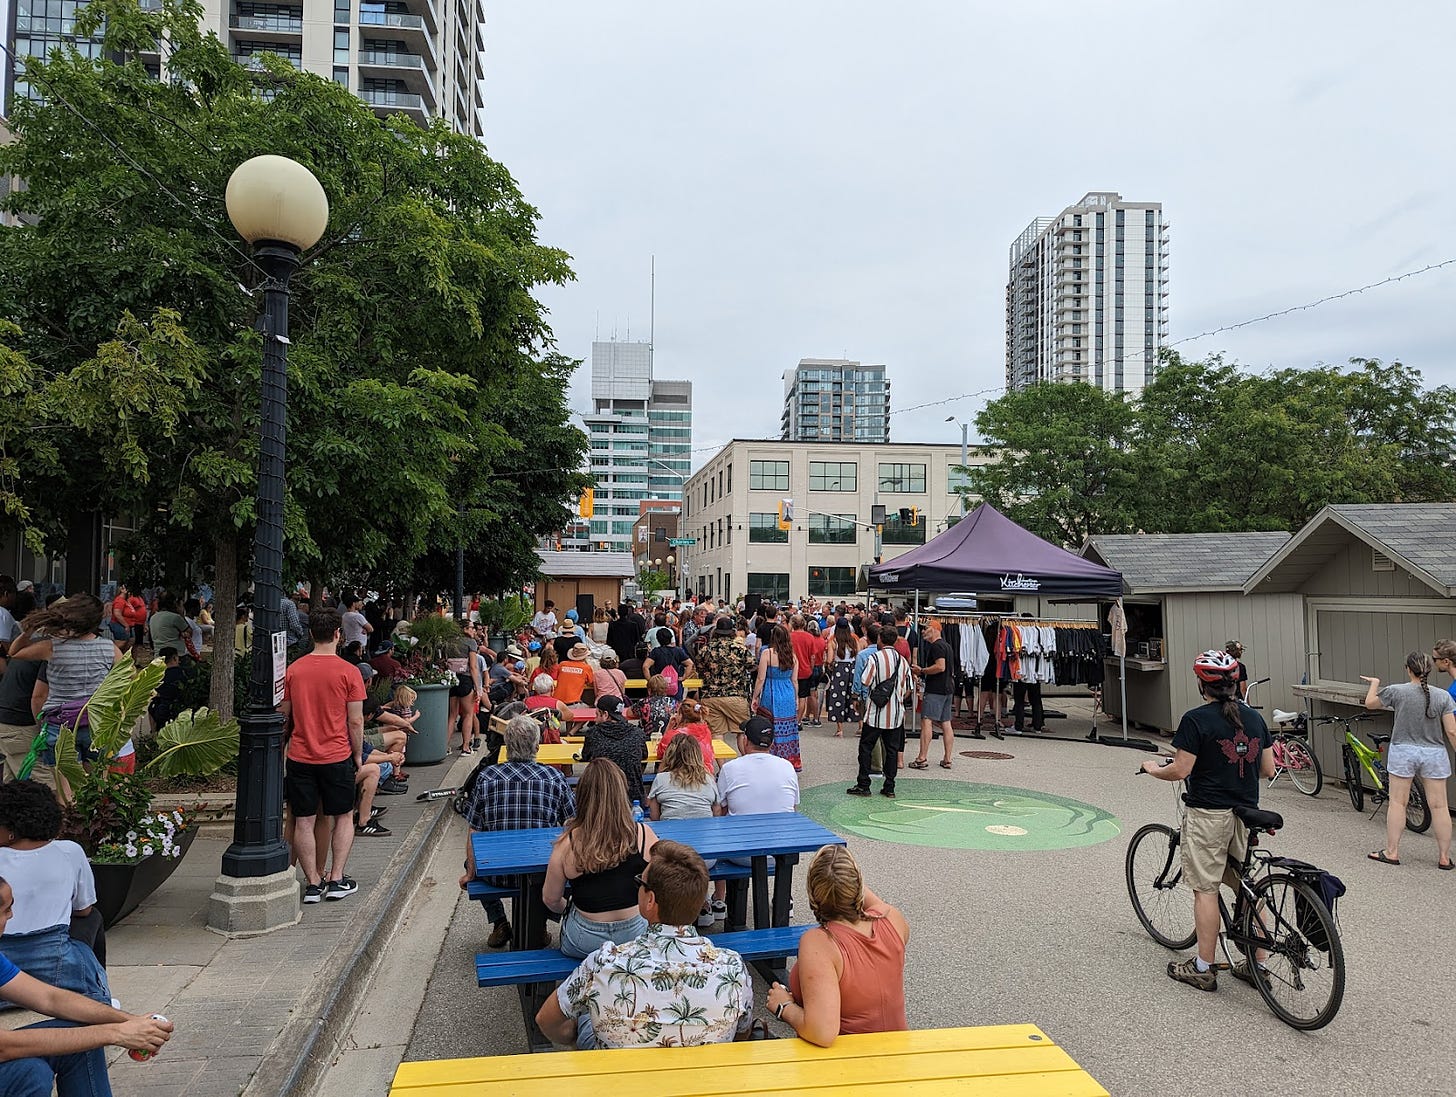 A street with many pedestrians and cyclists and no cars, street trees and tables on one side, pop-up shops on the side with the city skyline in the distance.